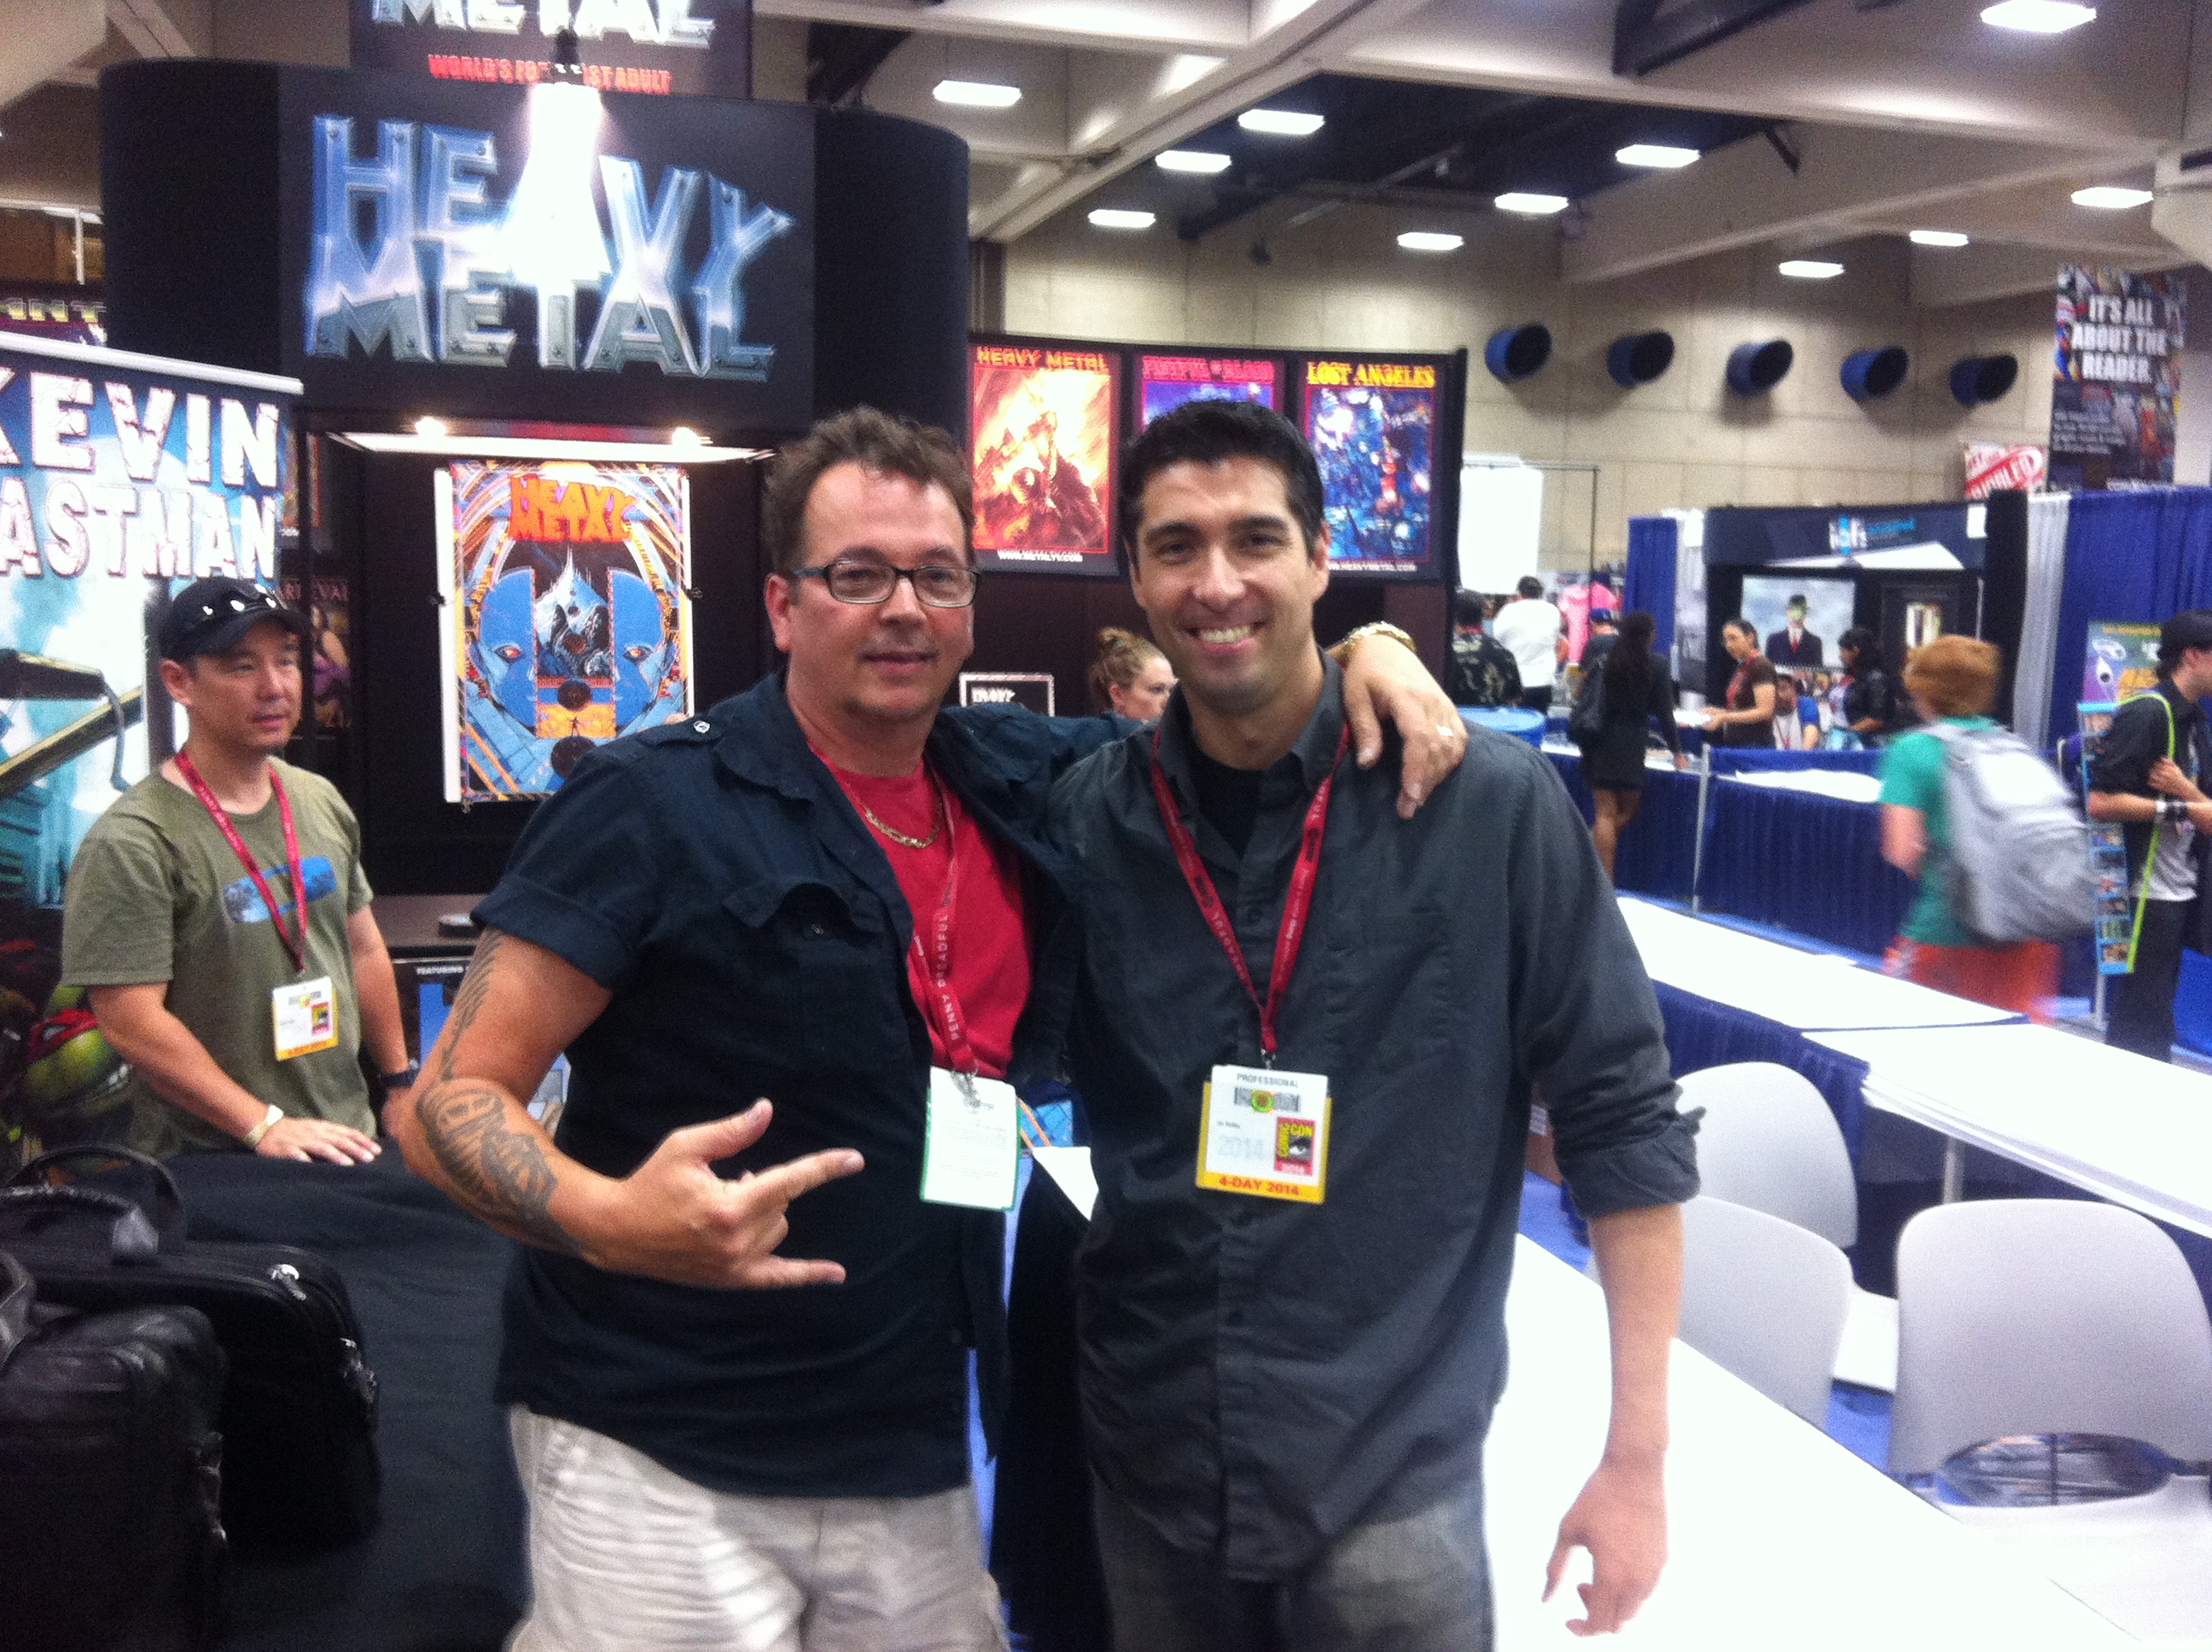 Jin Kelley and Kevin Eastman hanging out at the Heavy Metal booth at Comiccon 2014.